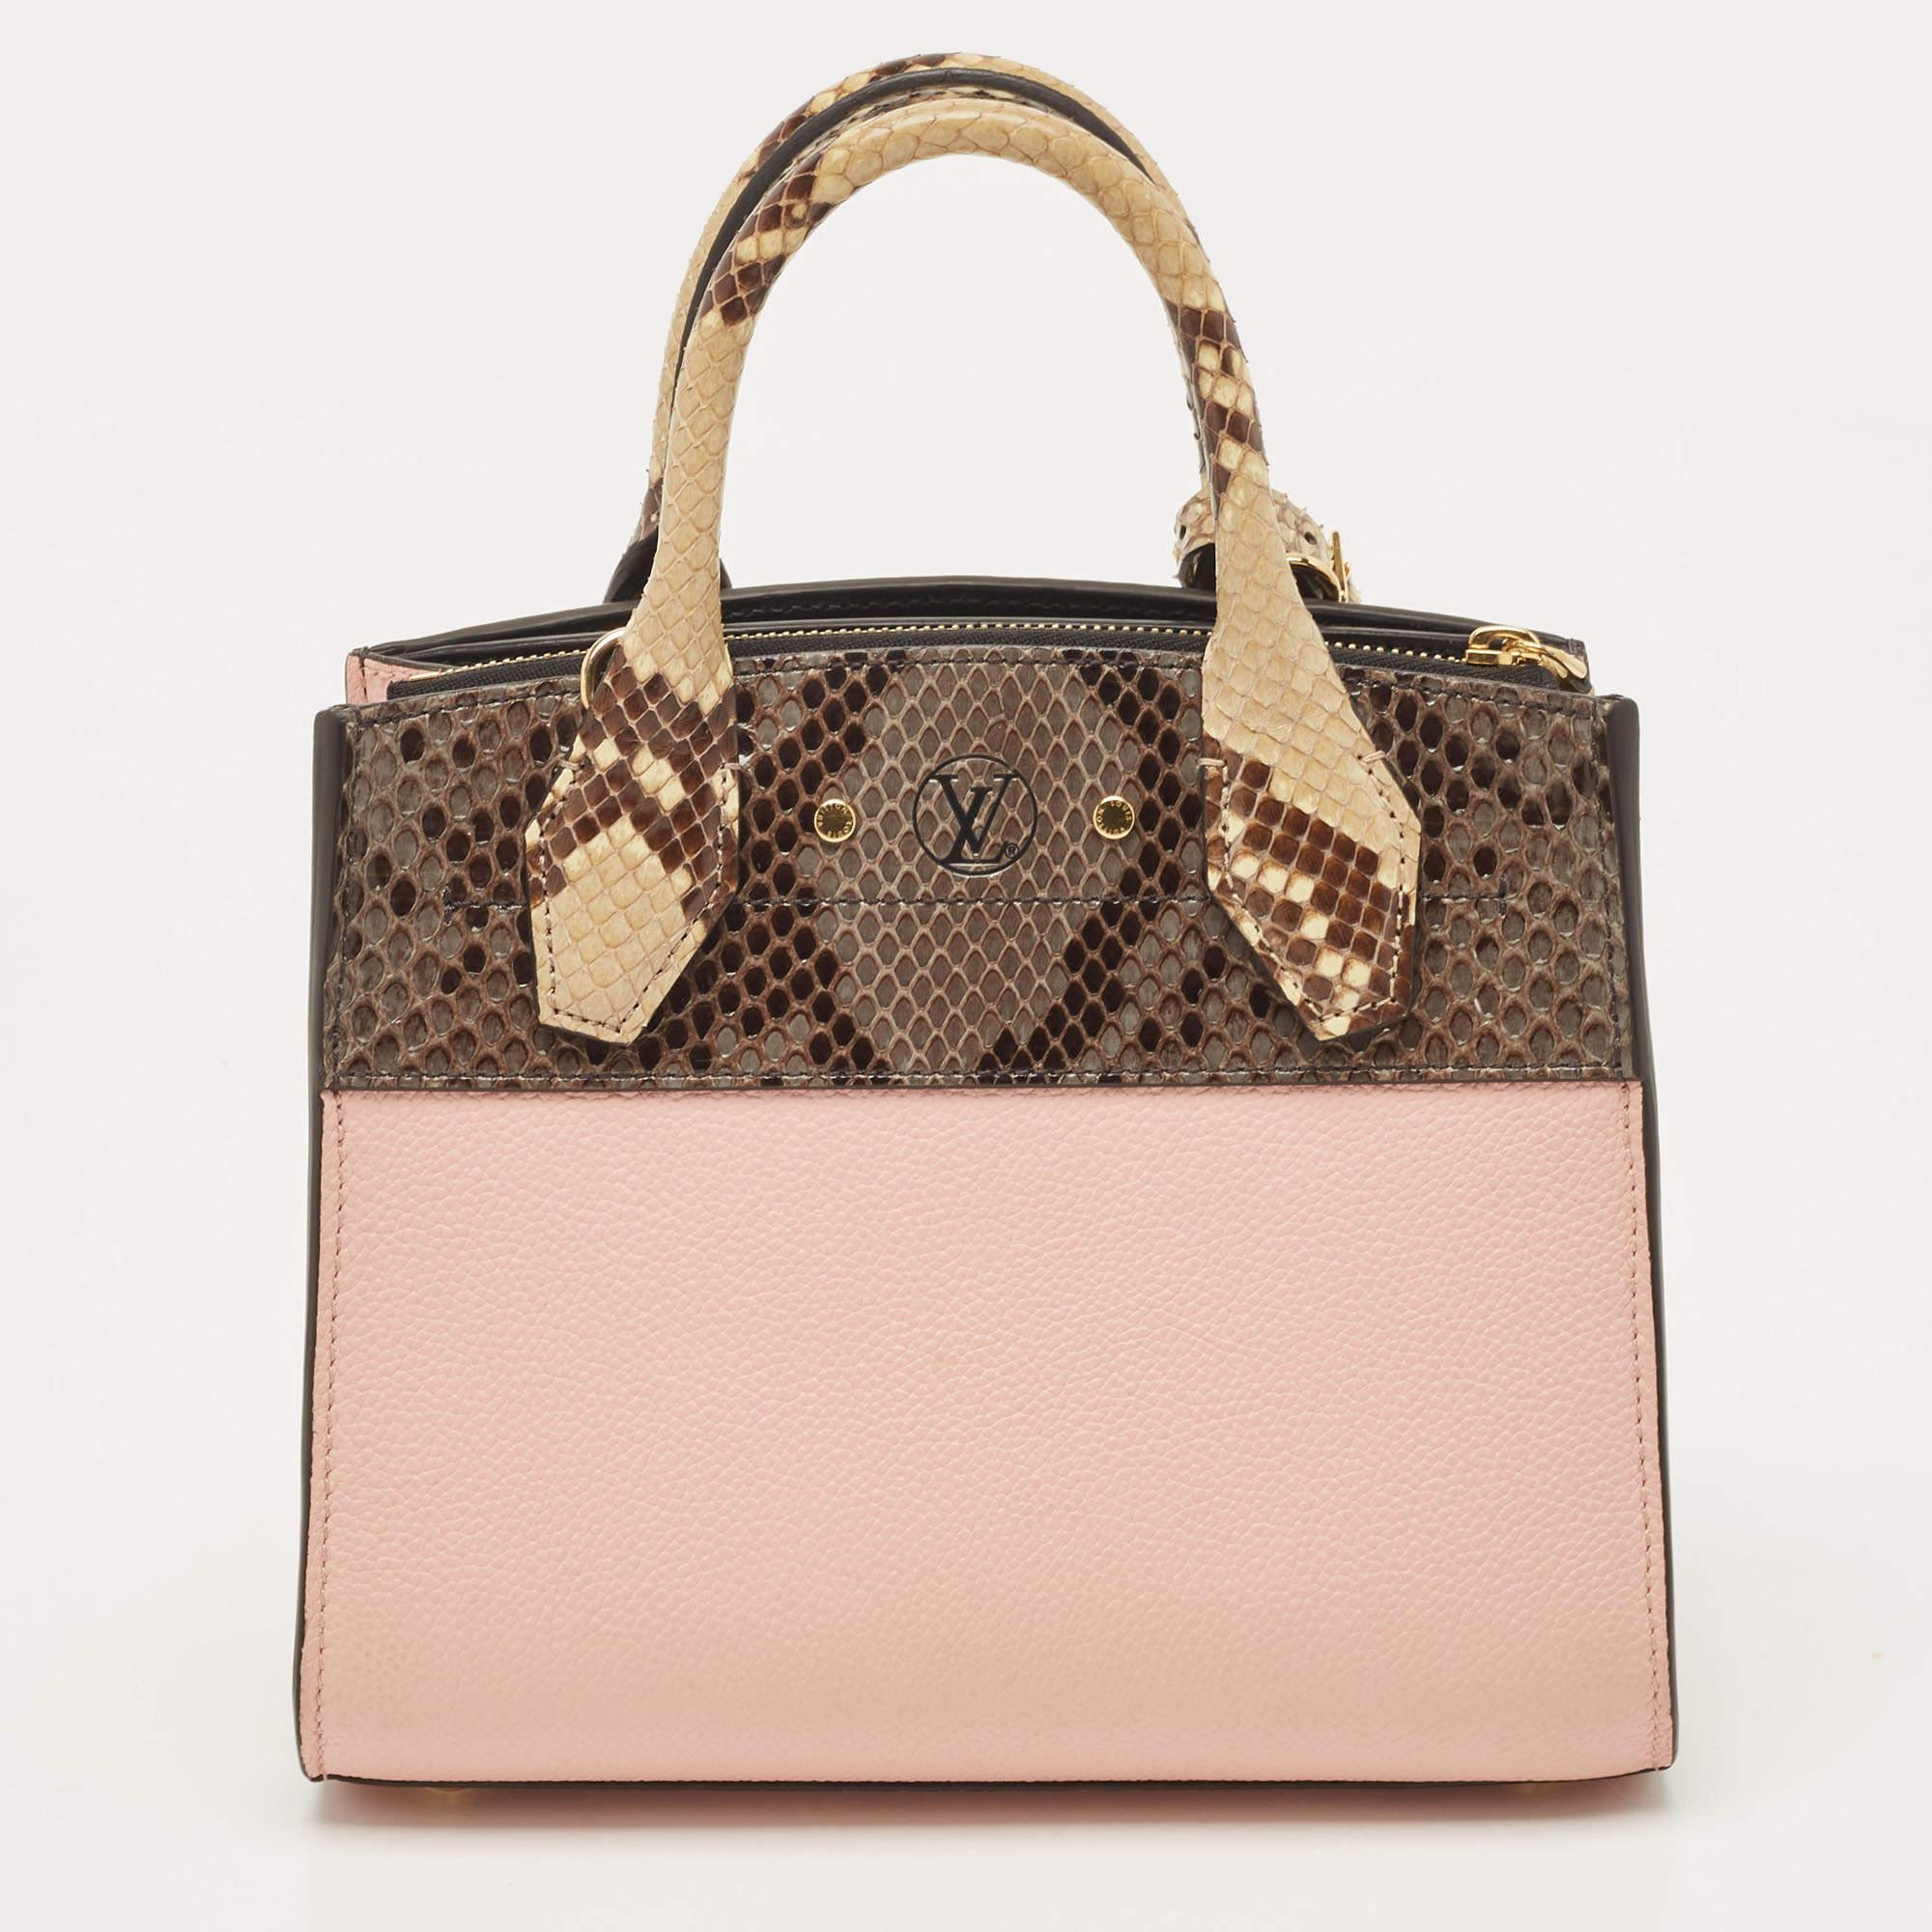 This opulent City Steamer mini bag by Louis Vuitton will ensure a harmonious mix of utility and classic appeal. Crafted from pink leather, it features python leather panels, a spacious interior, dual top rolled handles, and a detachable shoulder